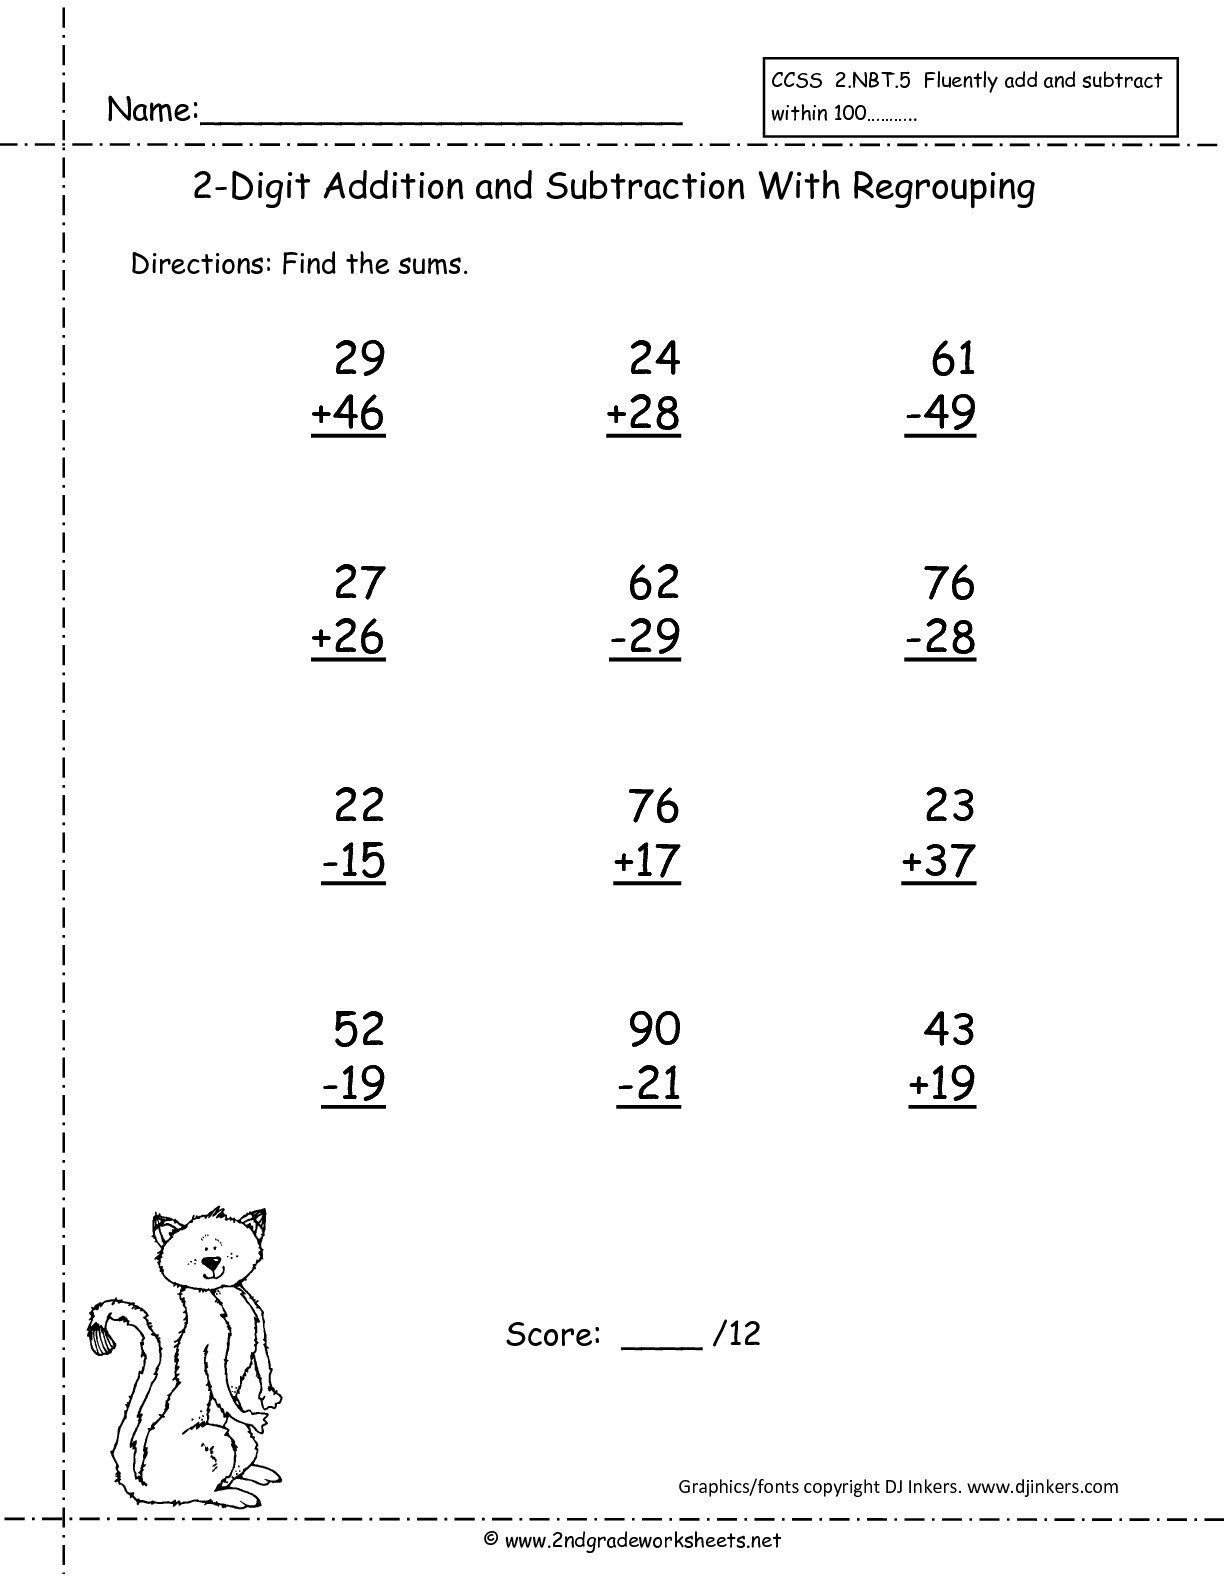 Two Digit Addition And Subtraction Worksheets From The Teacher&amp;#039;s Guide - Free Printable Double Digit Addition And Subtraction Worksheets